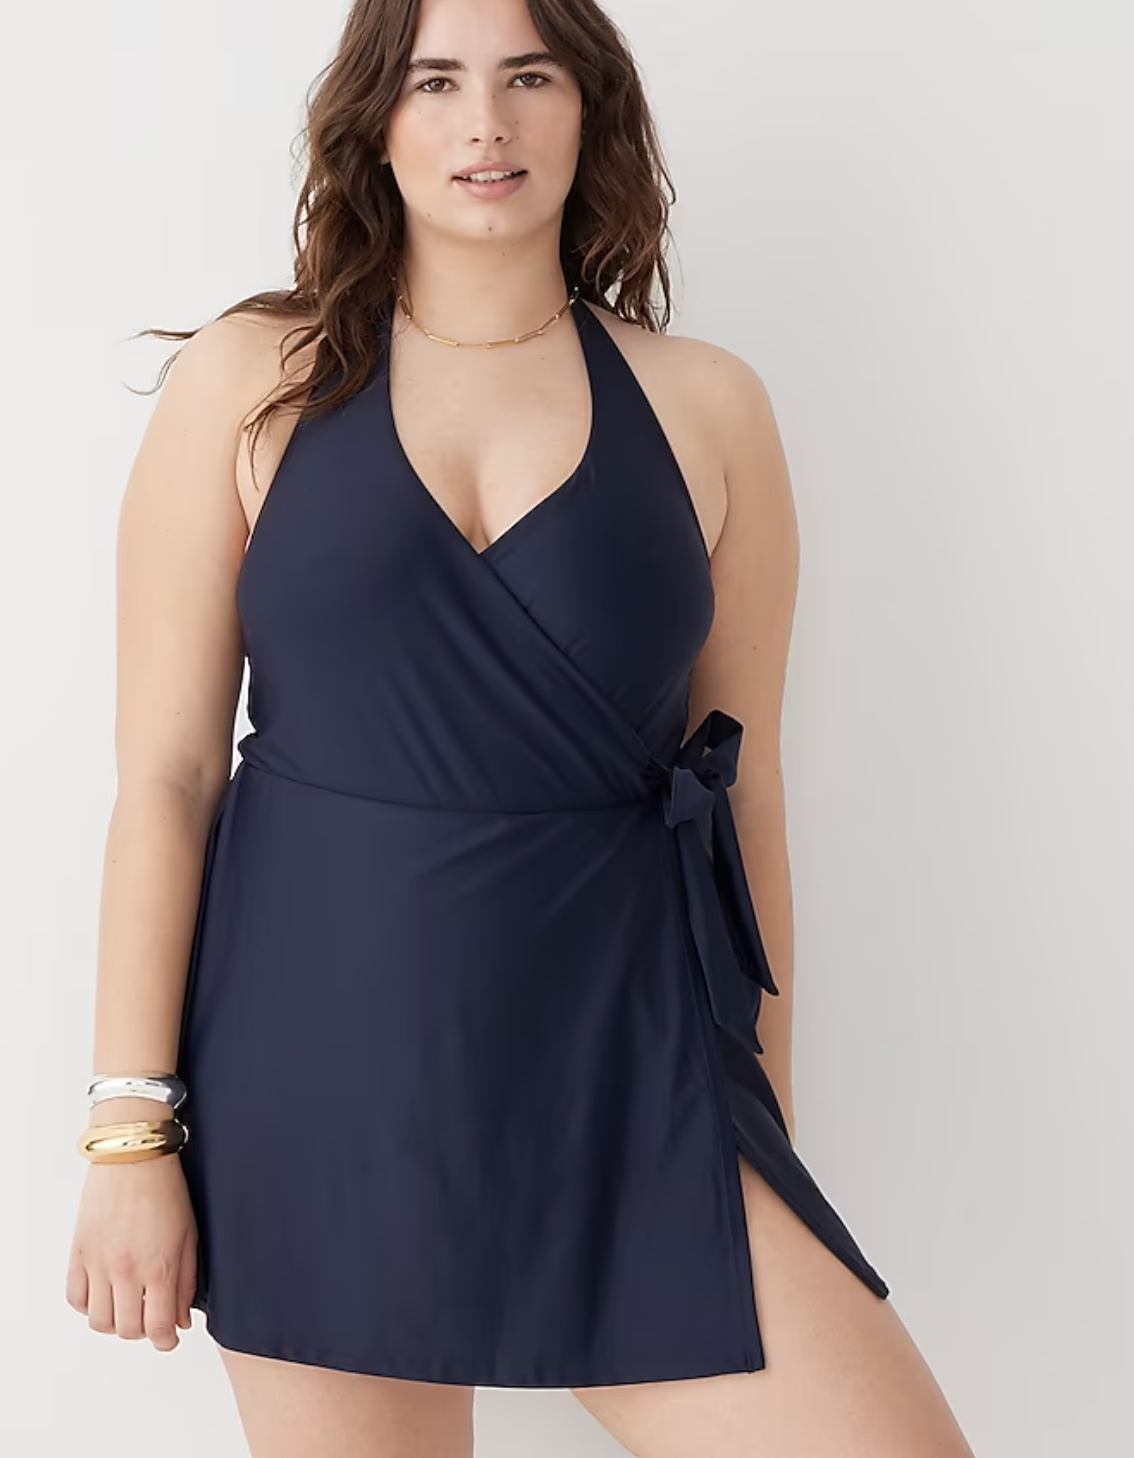 modest-swimsuits-for-women